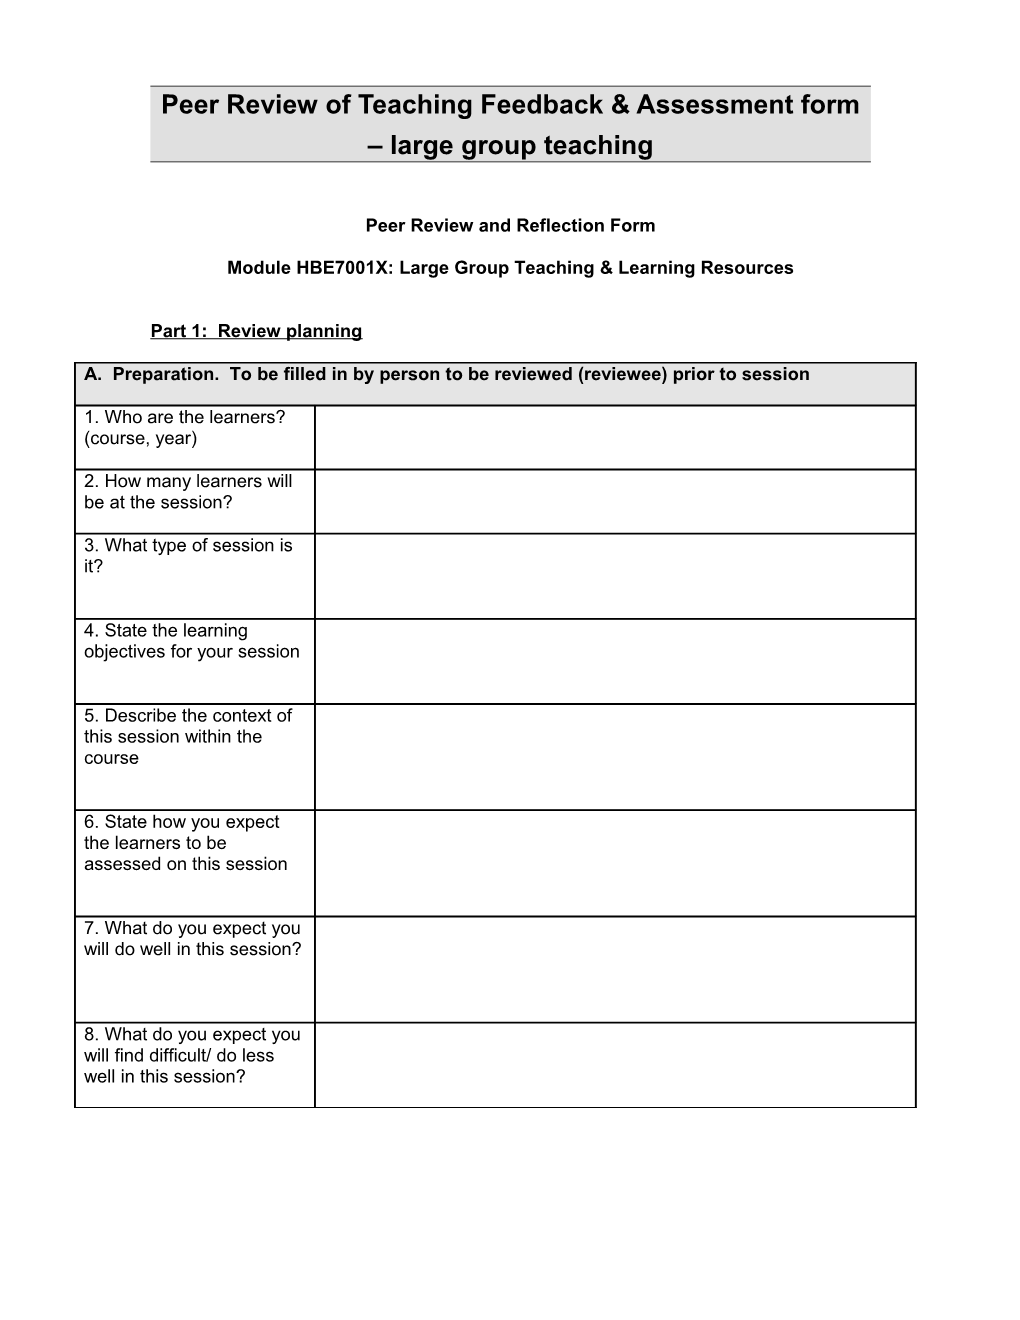 Peer Review of Teaching Feedback & Assessment Form